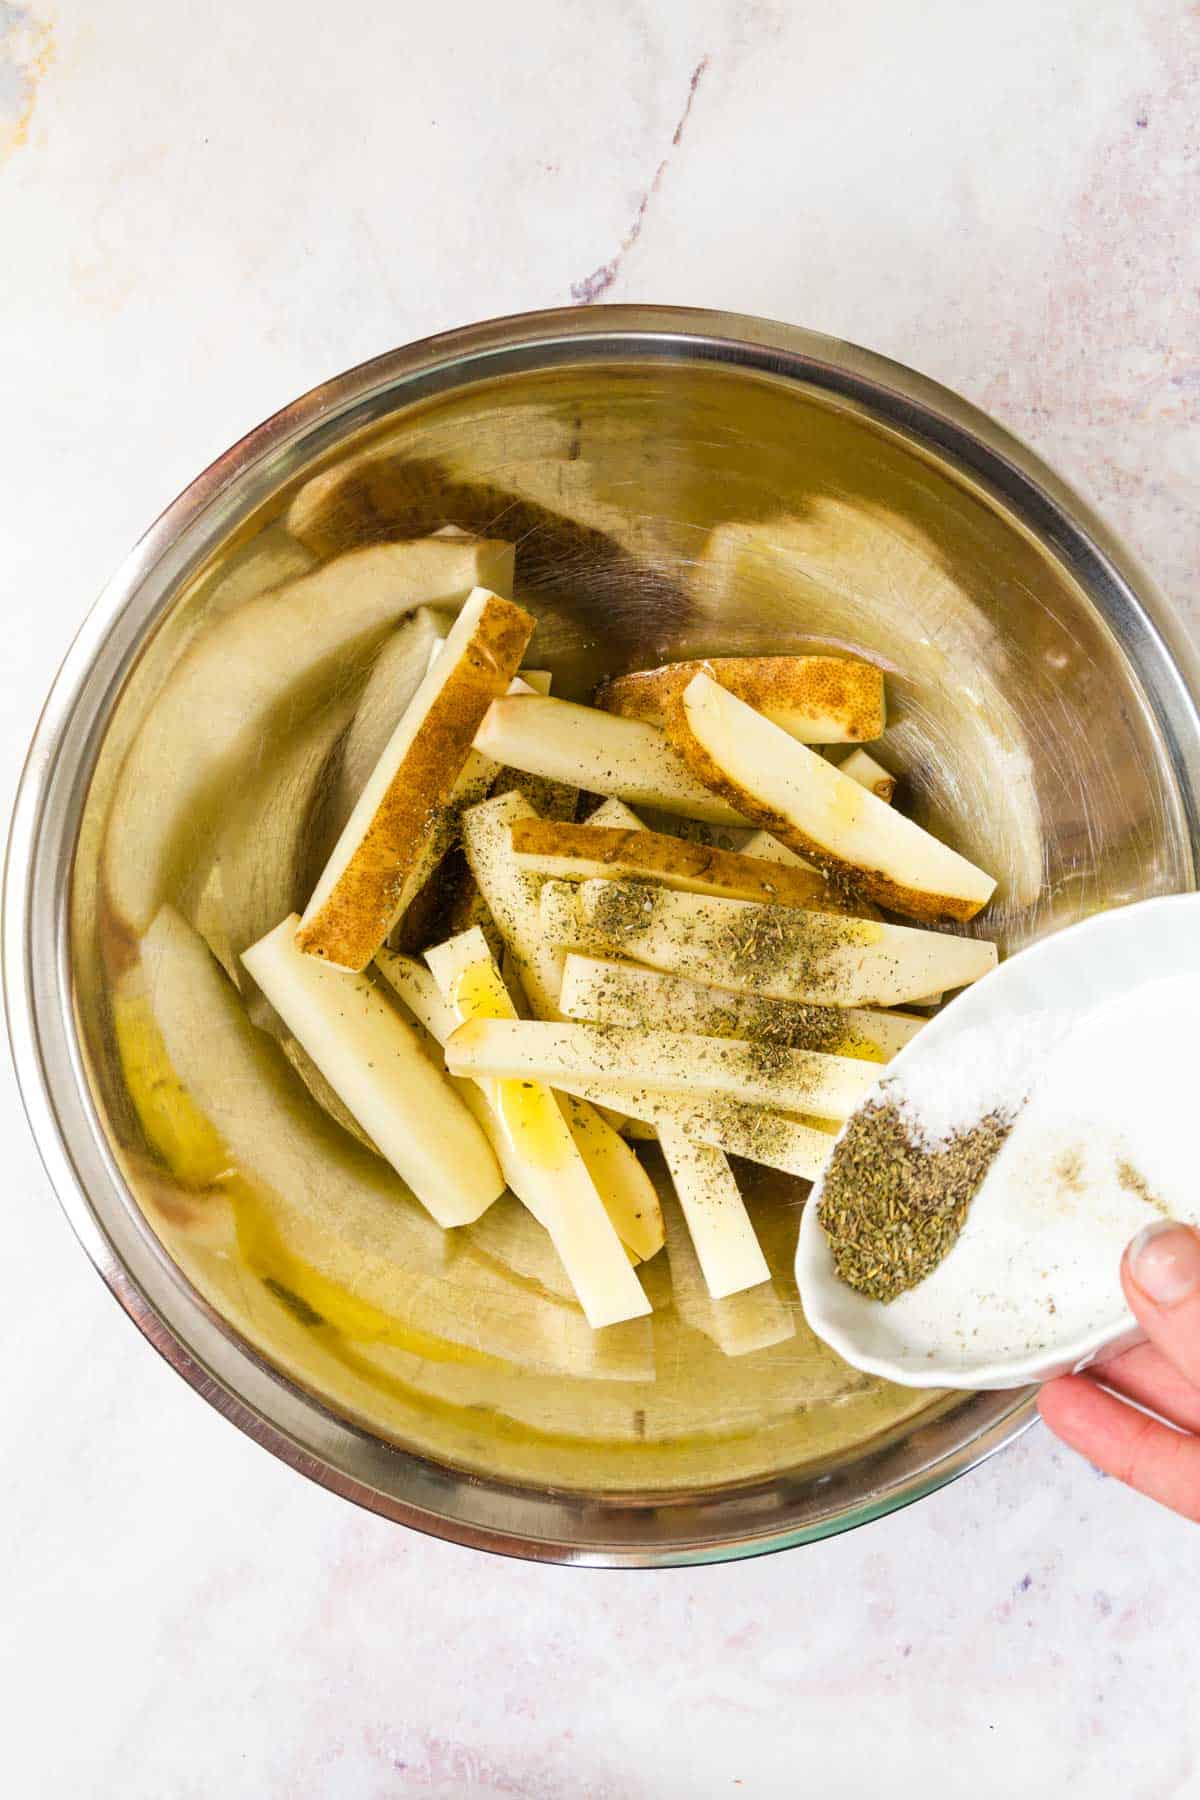 Salt, pepper and Italian seasoning being poured into a metal bowl with unbaked fries and oil